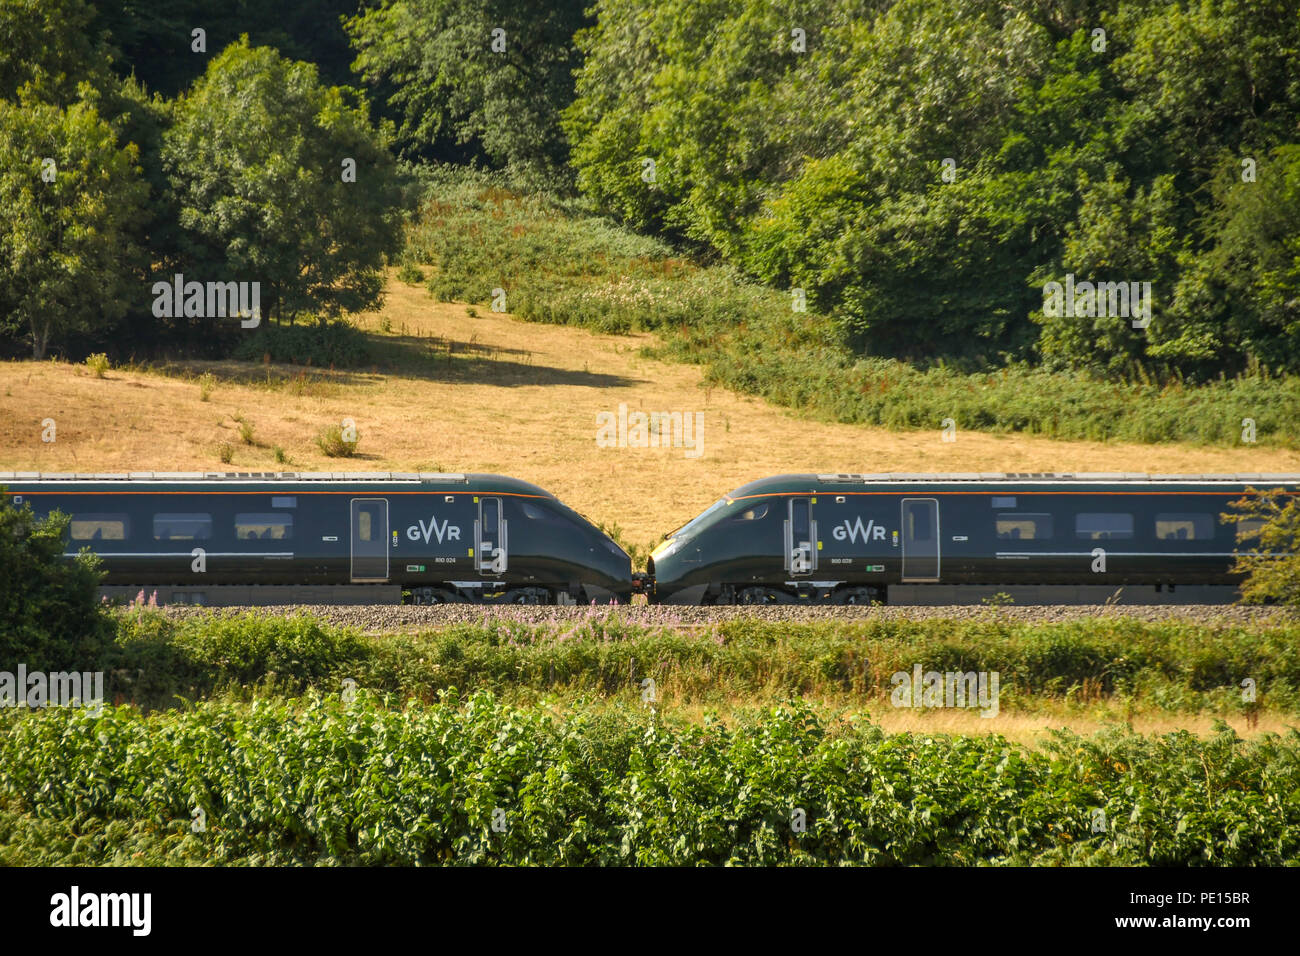 Middle of a new inter city express train operated by Great Western Railway at speed through countryside. The train is formed of two train units joined Stock Photo